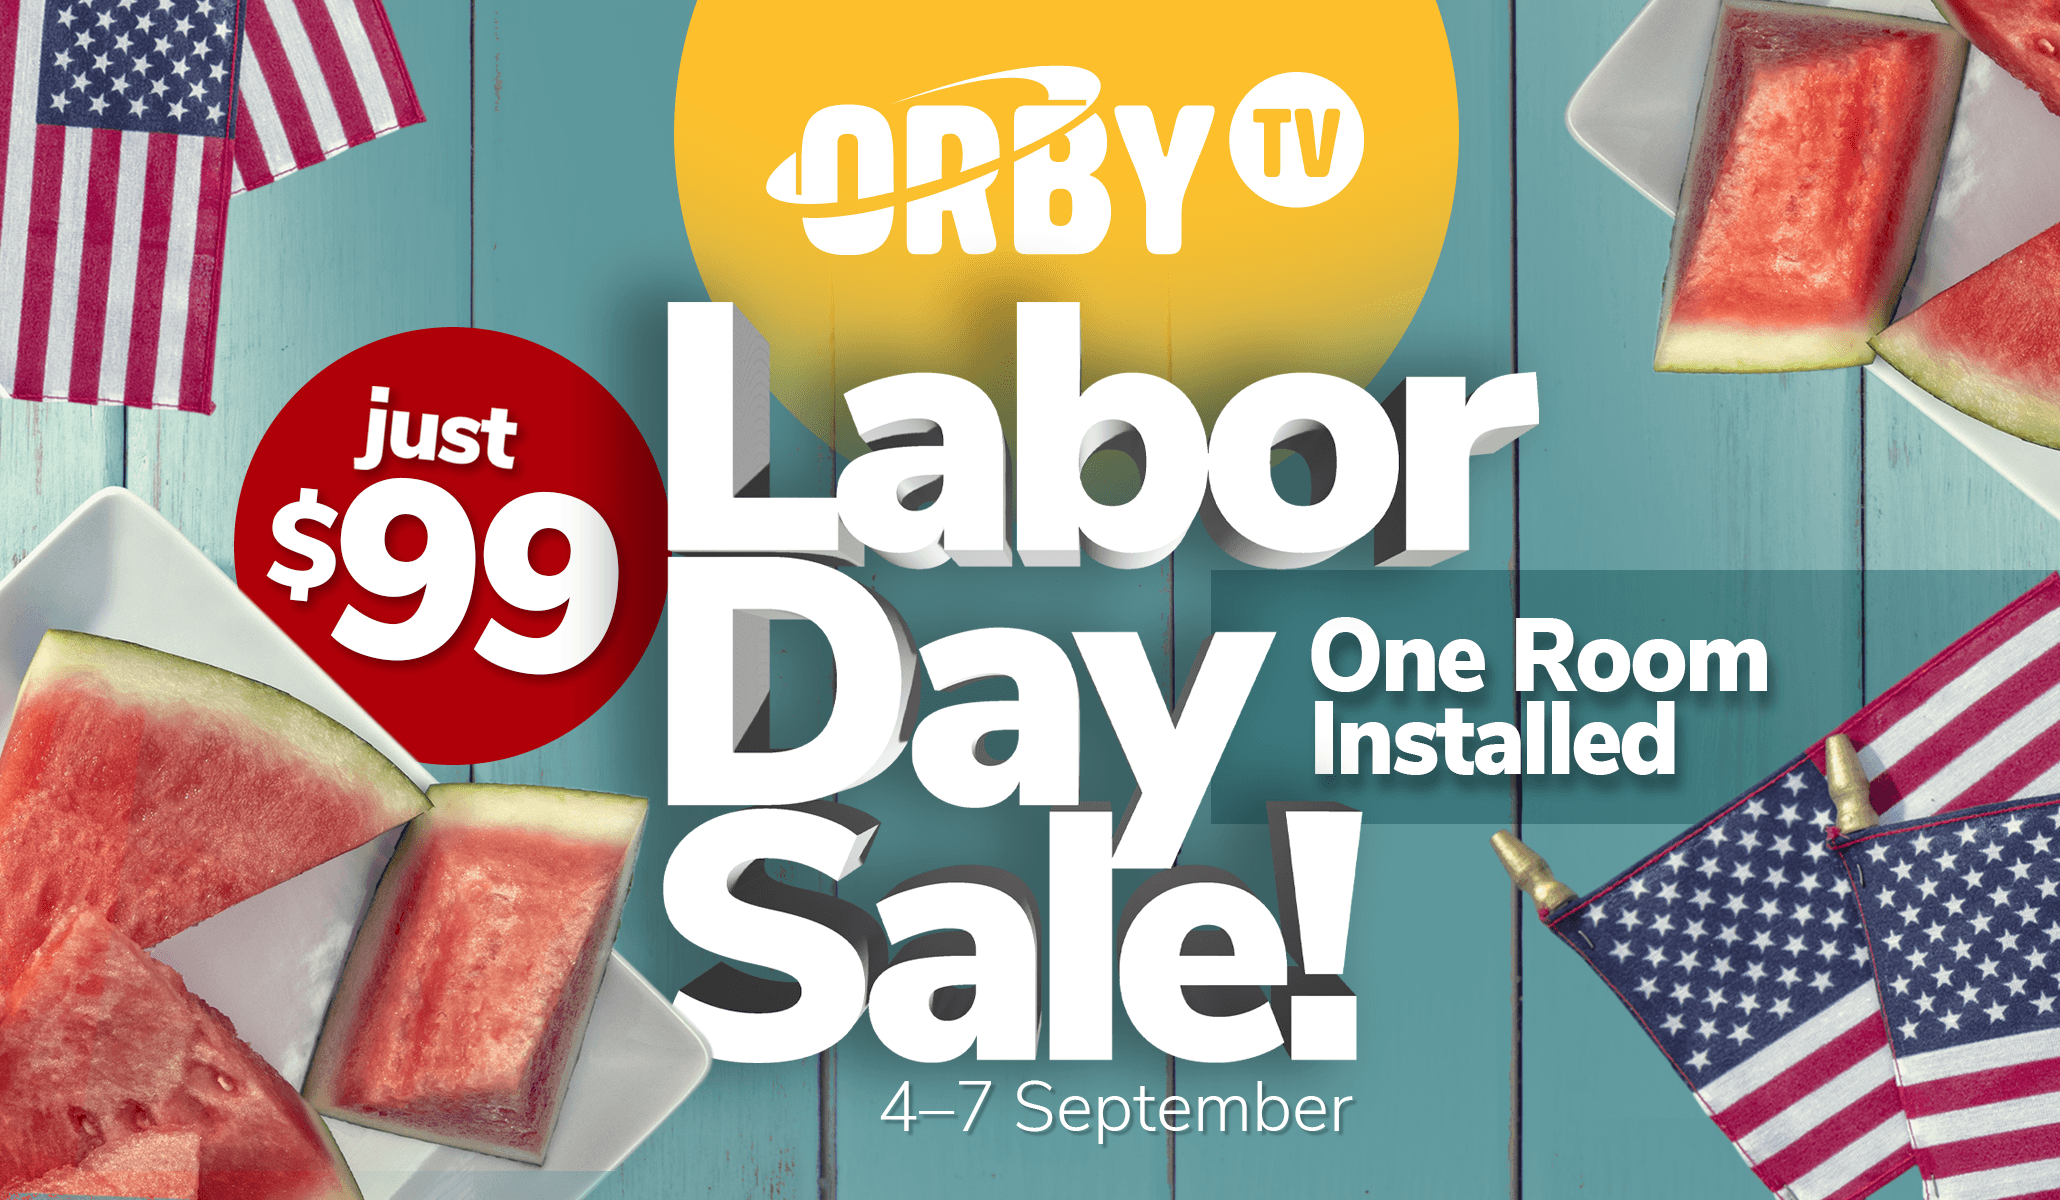 Orby TV is Offering a Labor Day Sale for New Customers